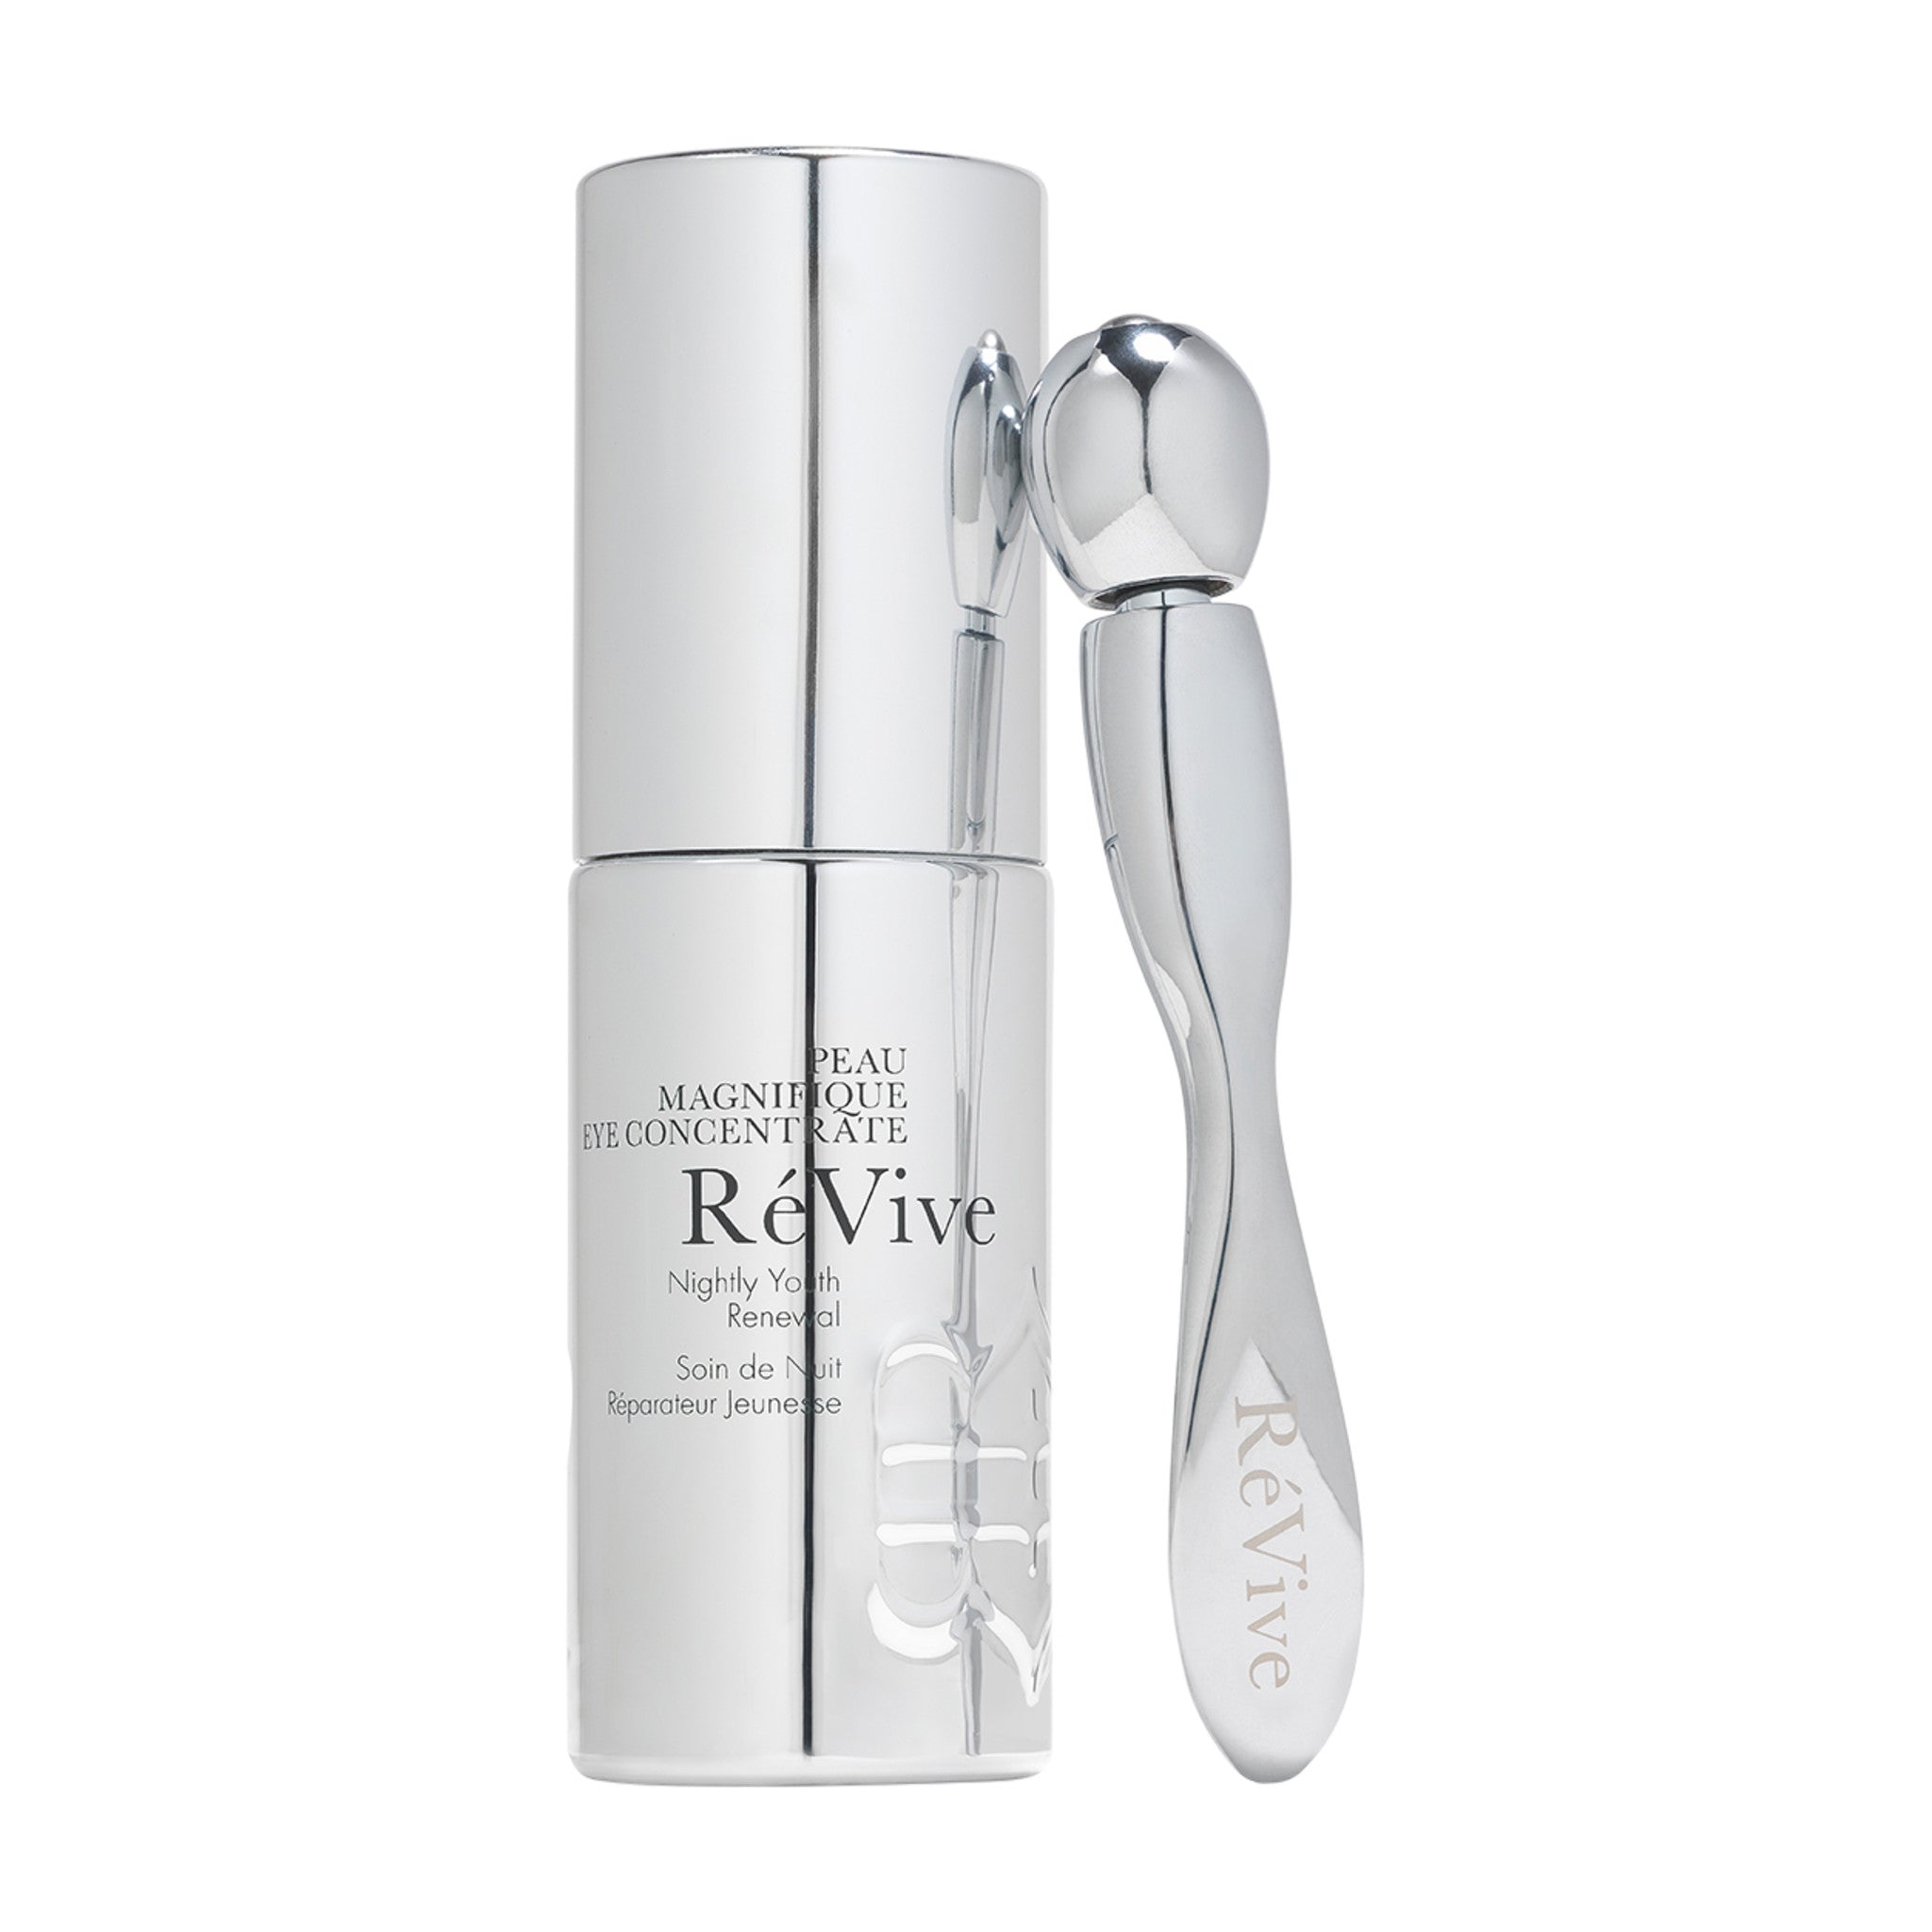 RéVive Peau Magnifique Eye Concentrate Nightly Youth Renewal main image.